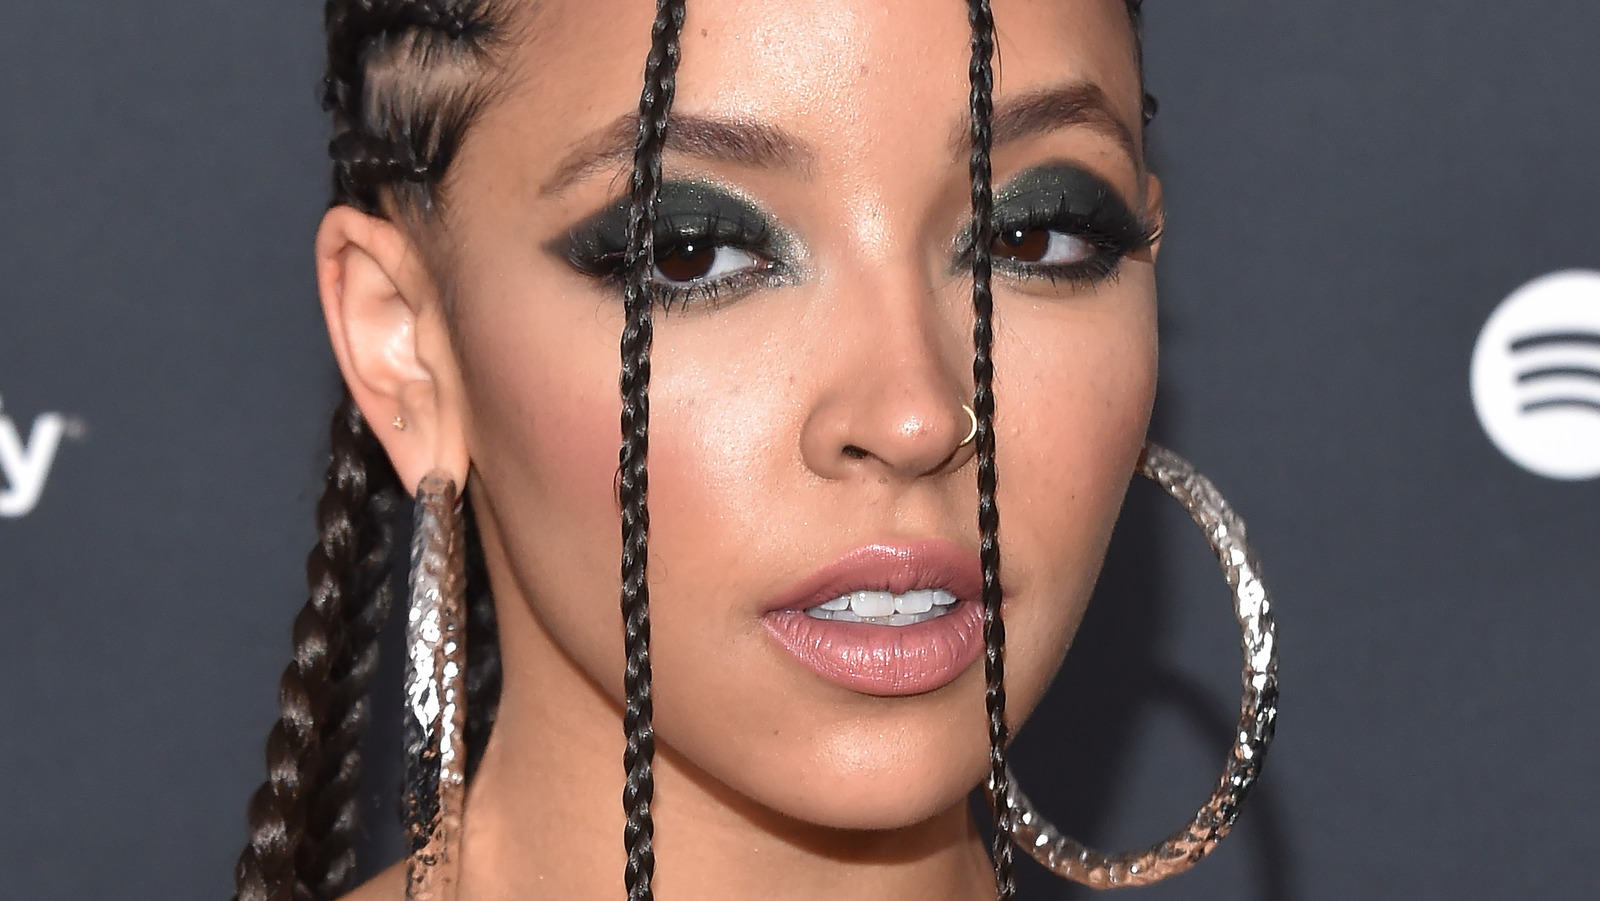 What We Know About Tinashe's New Album